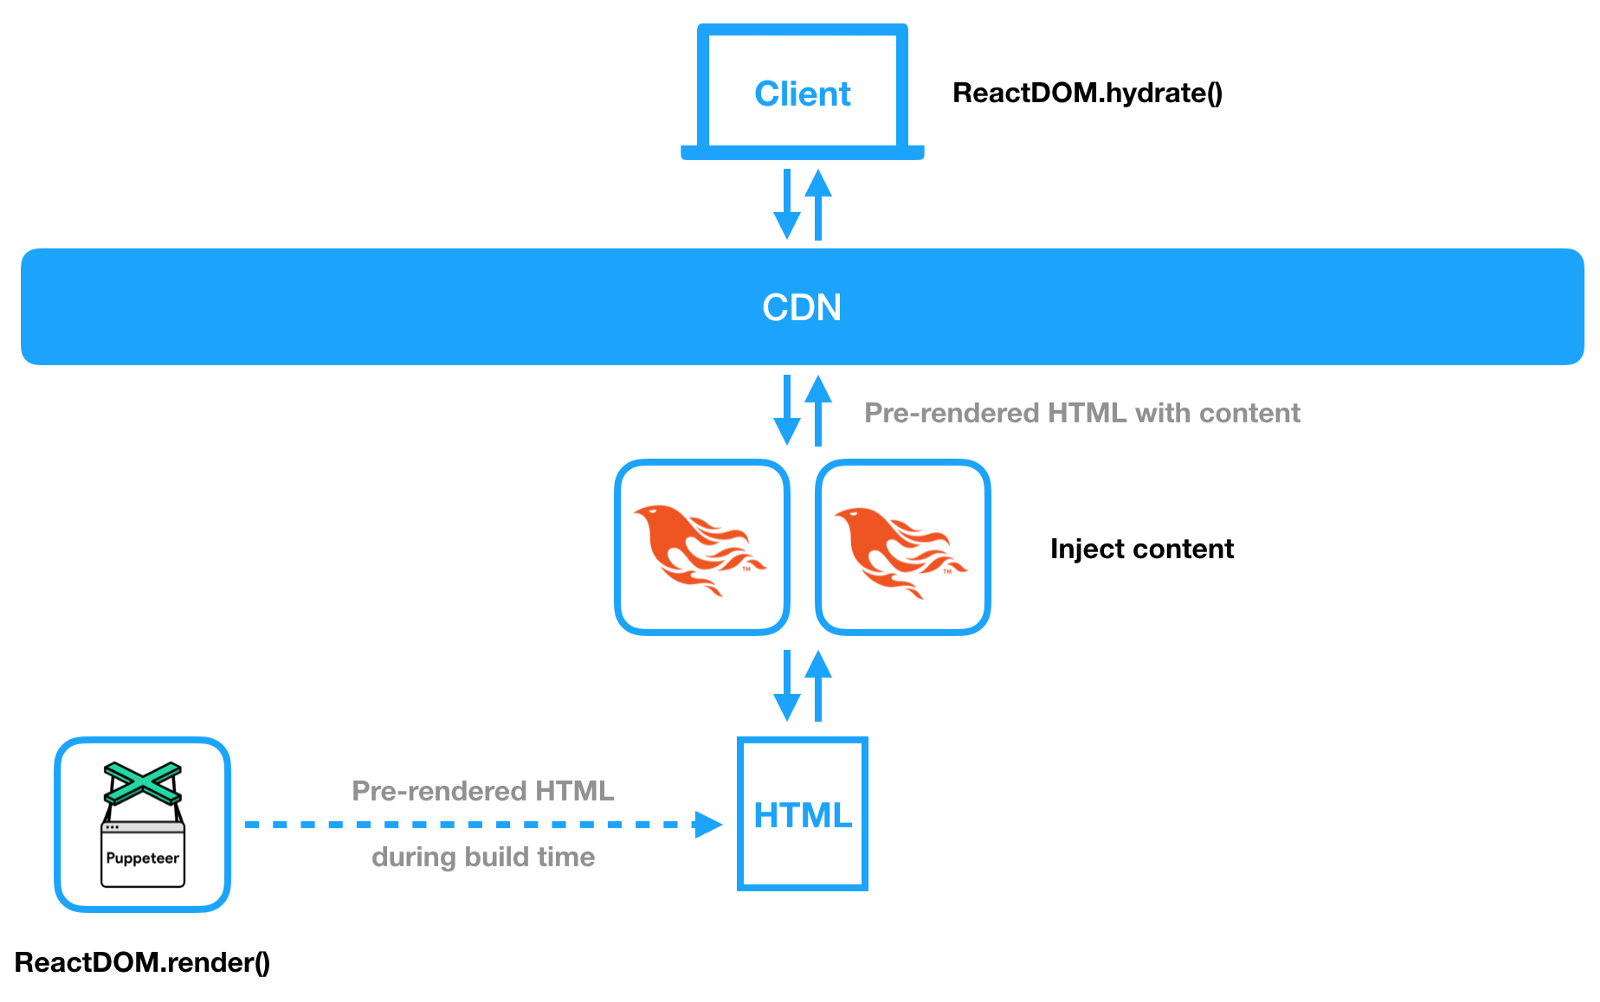 The architecture of pre-rendering with Puppeteer, server-side rendering with Phoenix, and hydration on the client-side with React